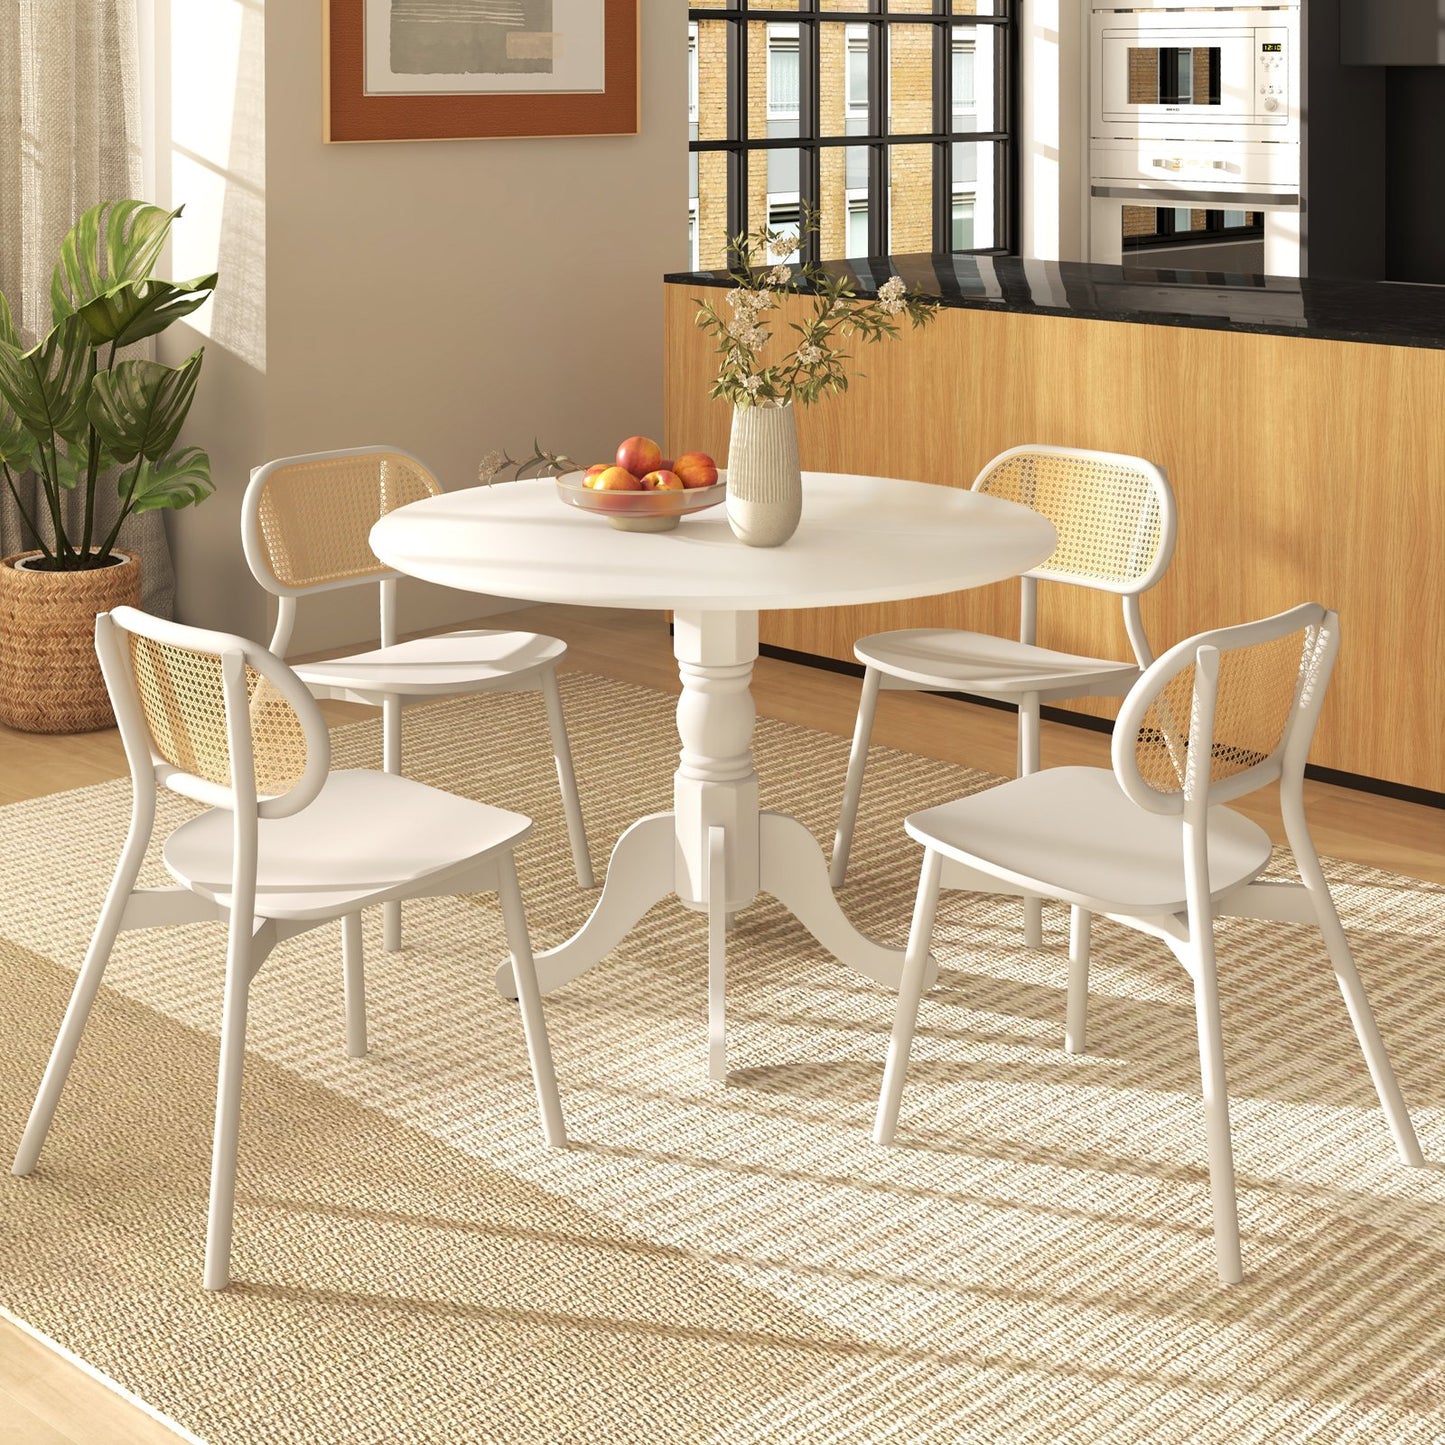 Wooden Dining Table with Round Tabletop and Curved Trestle Legs, White